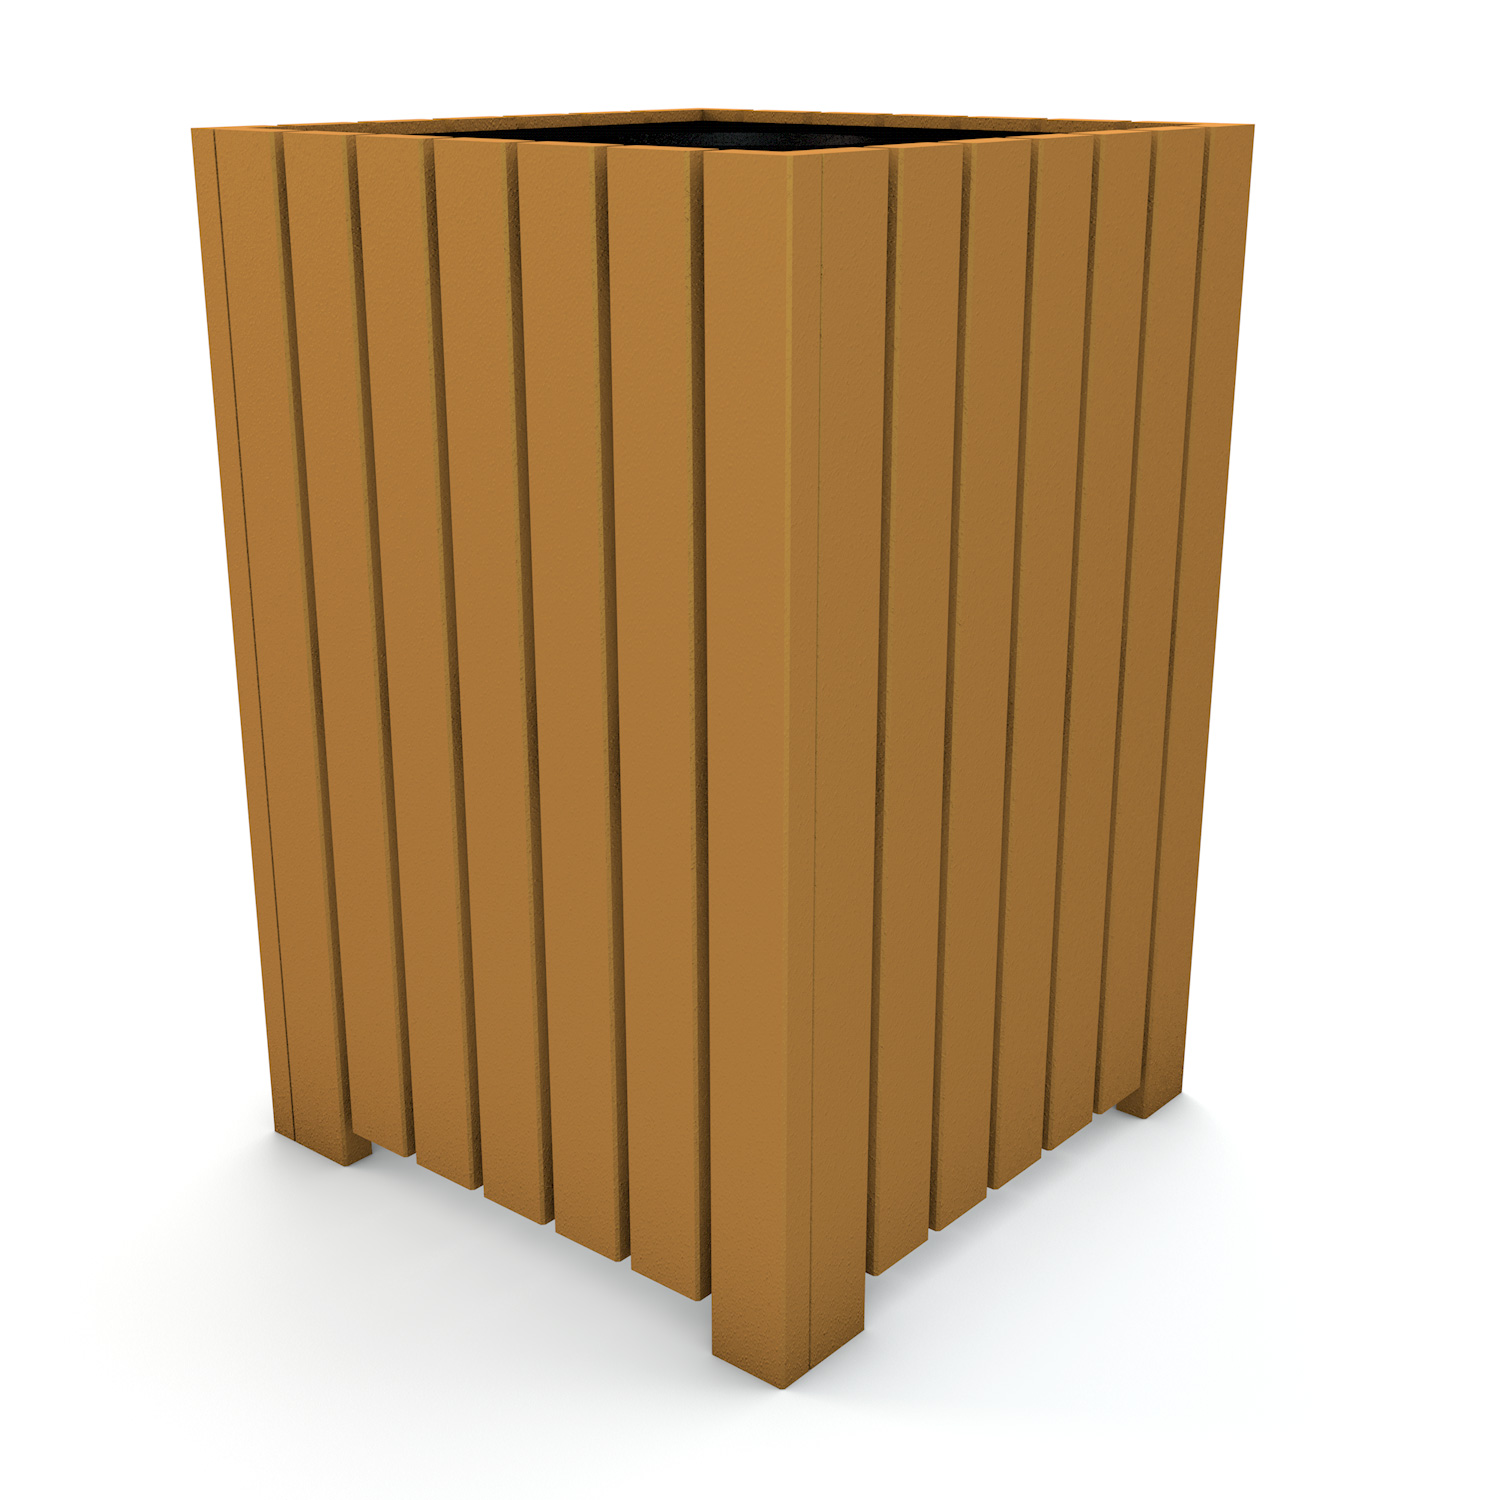 32 Gallon Standard Square Recycled Plastic Trash Receptacle